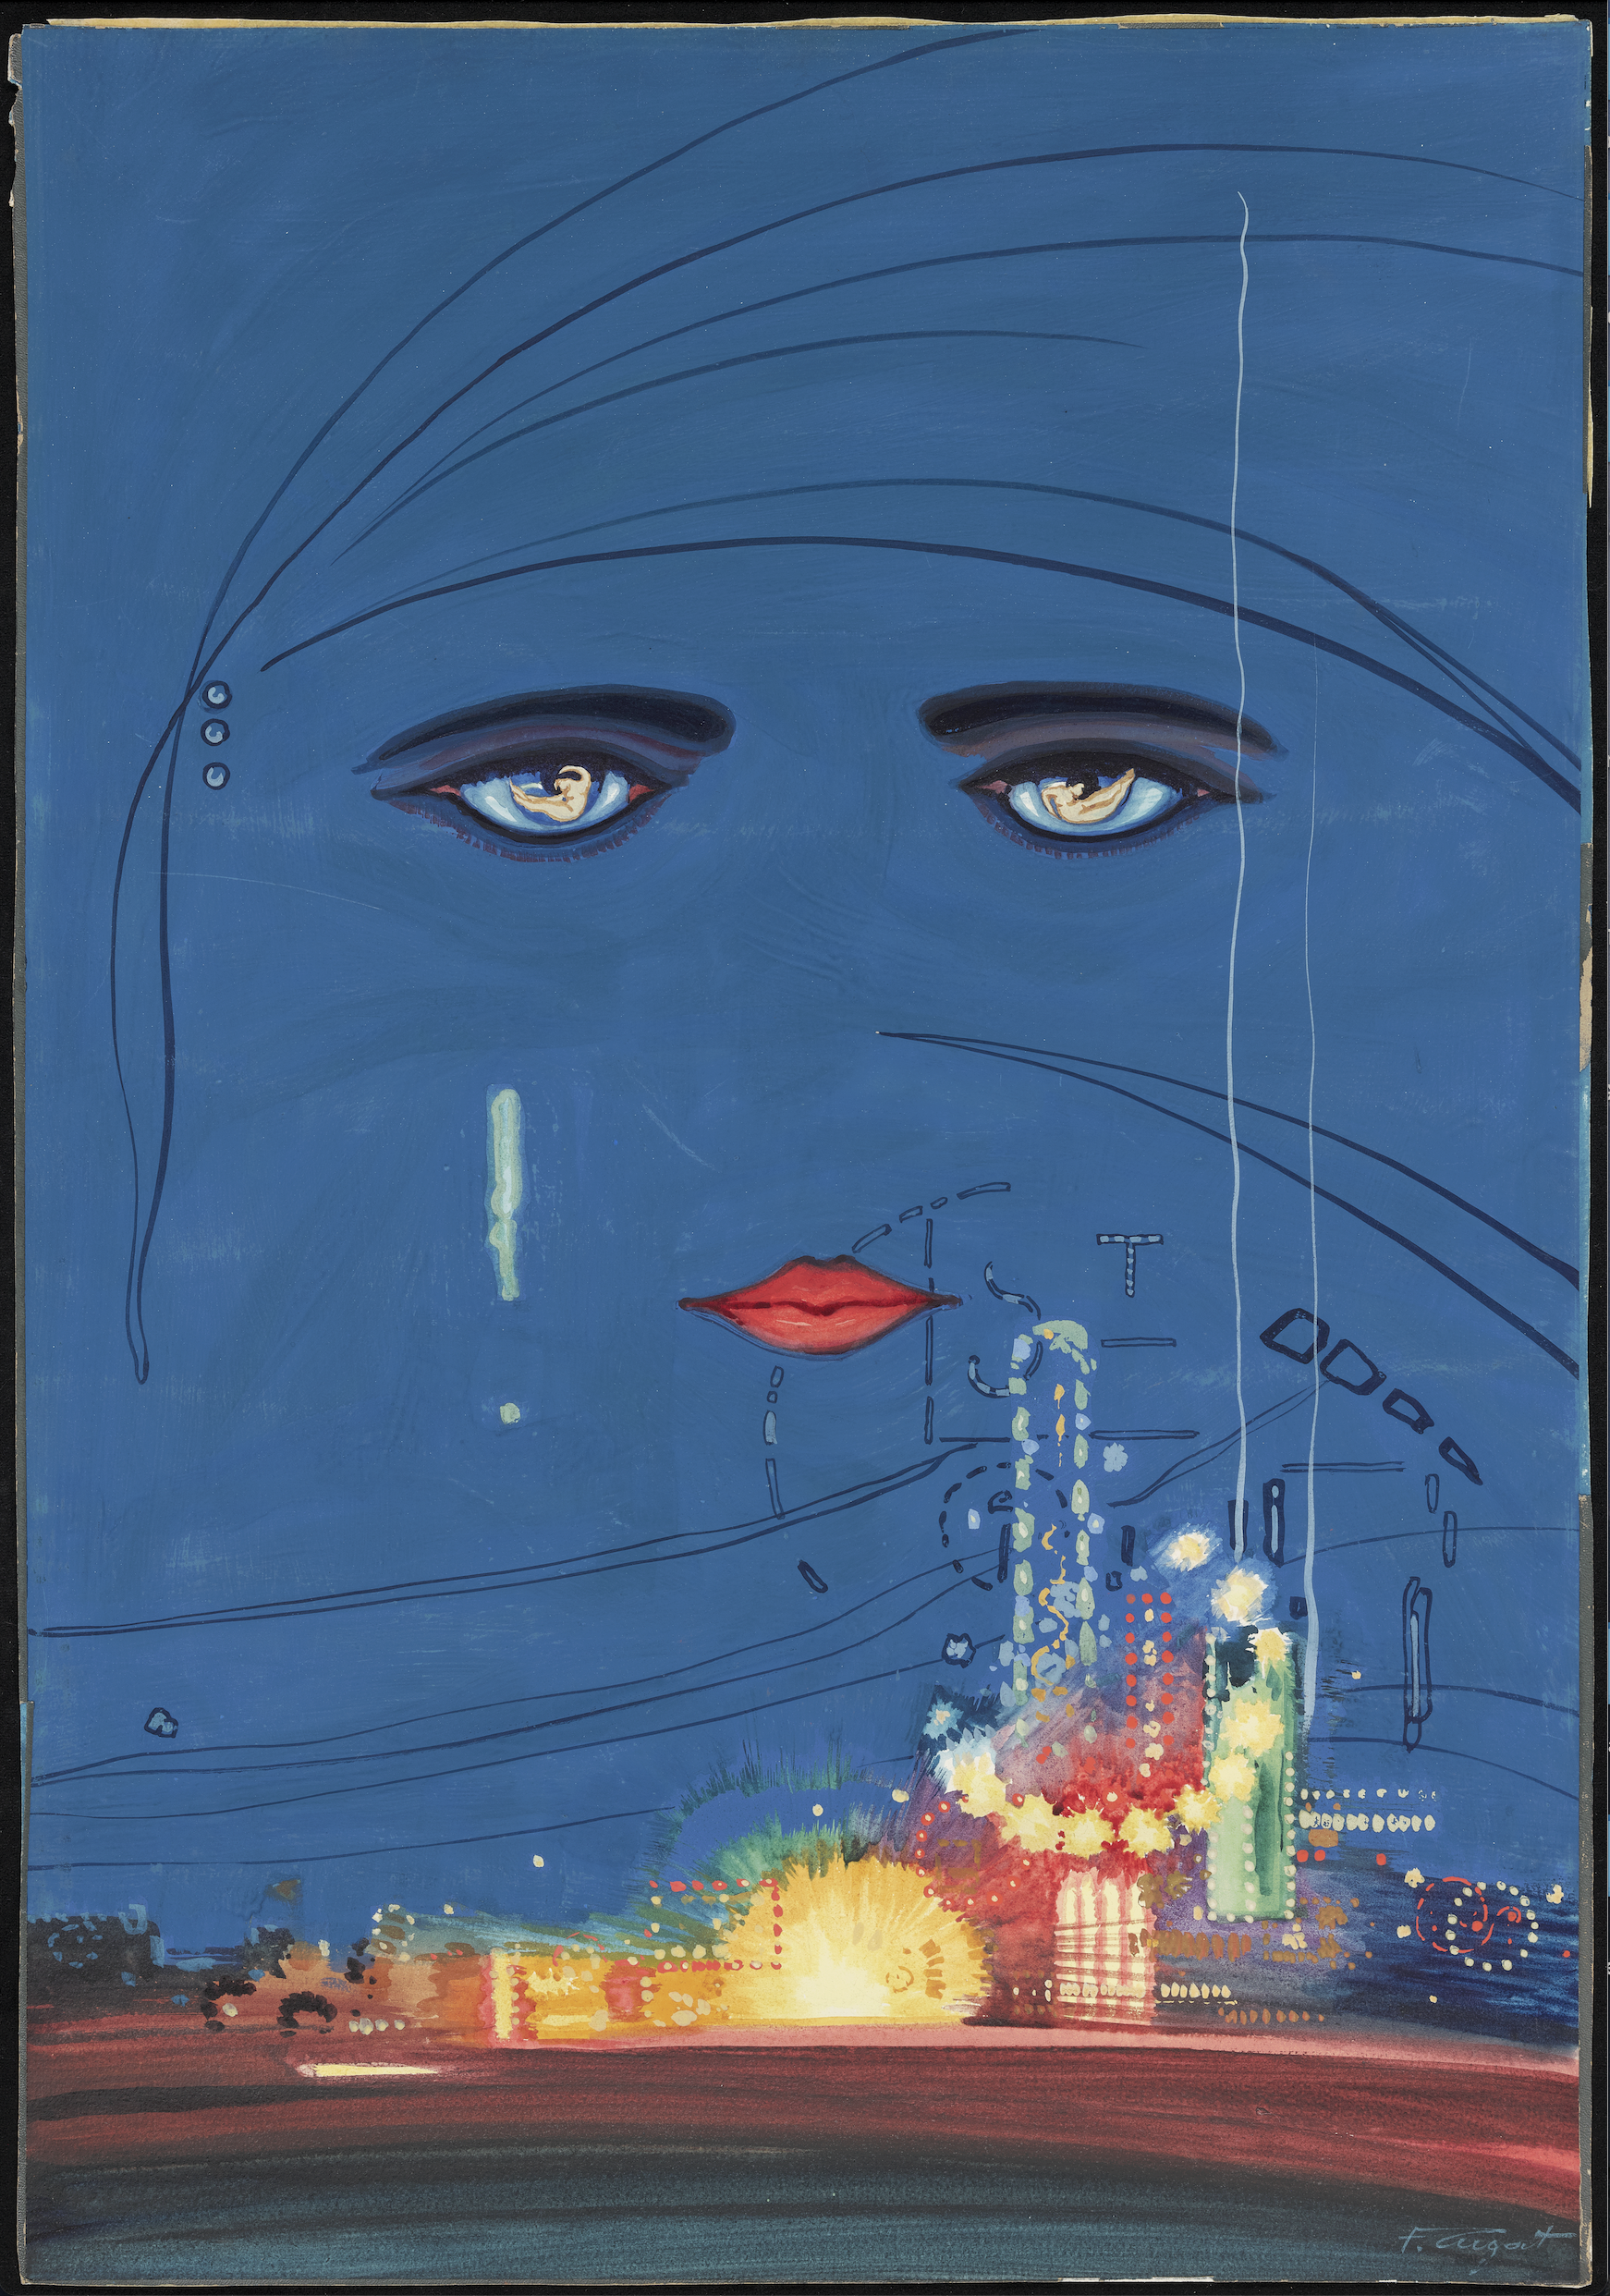 Illustrated face with heavily lined eyes and red painted lips over a night sky and above a brightly lit boardwalk and amusements